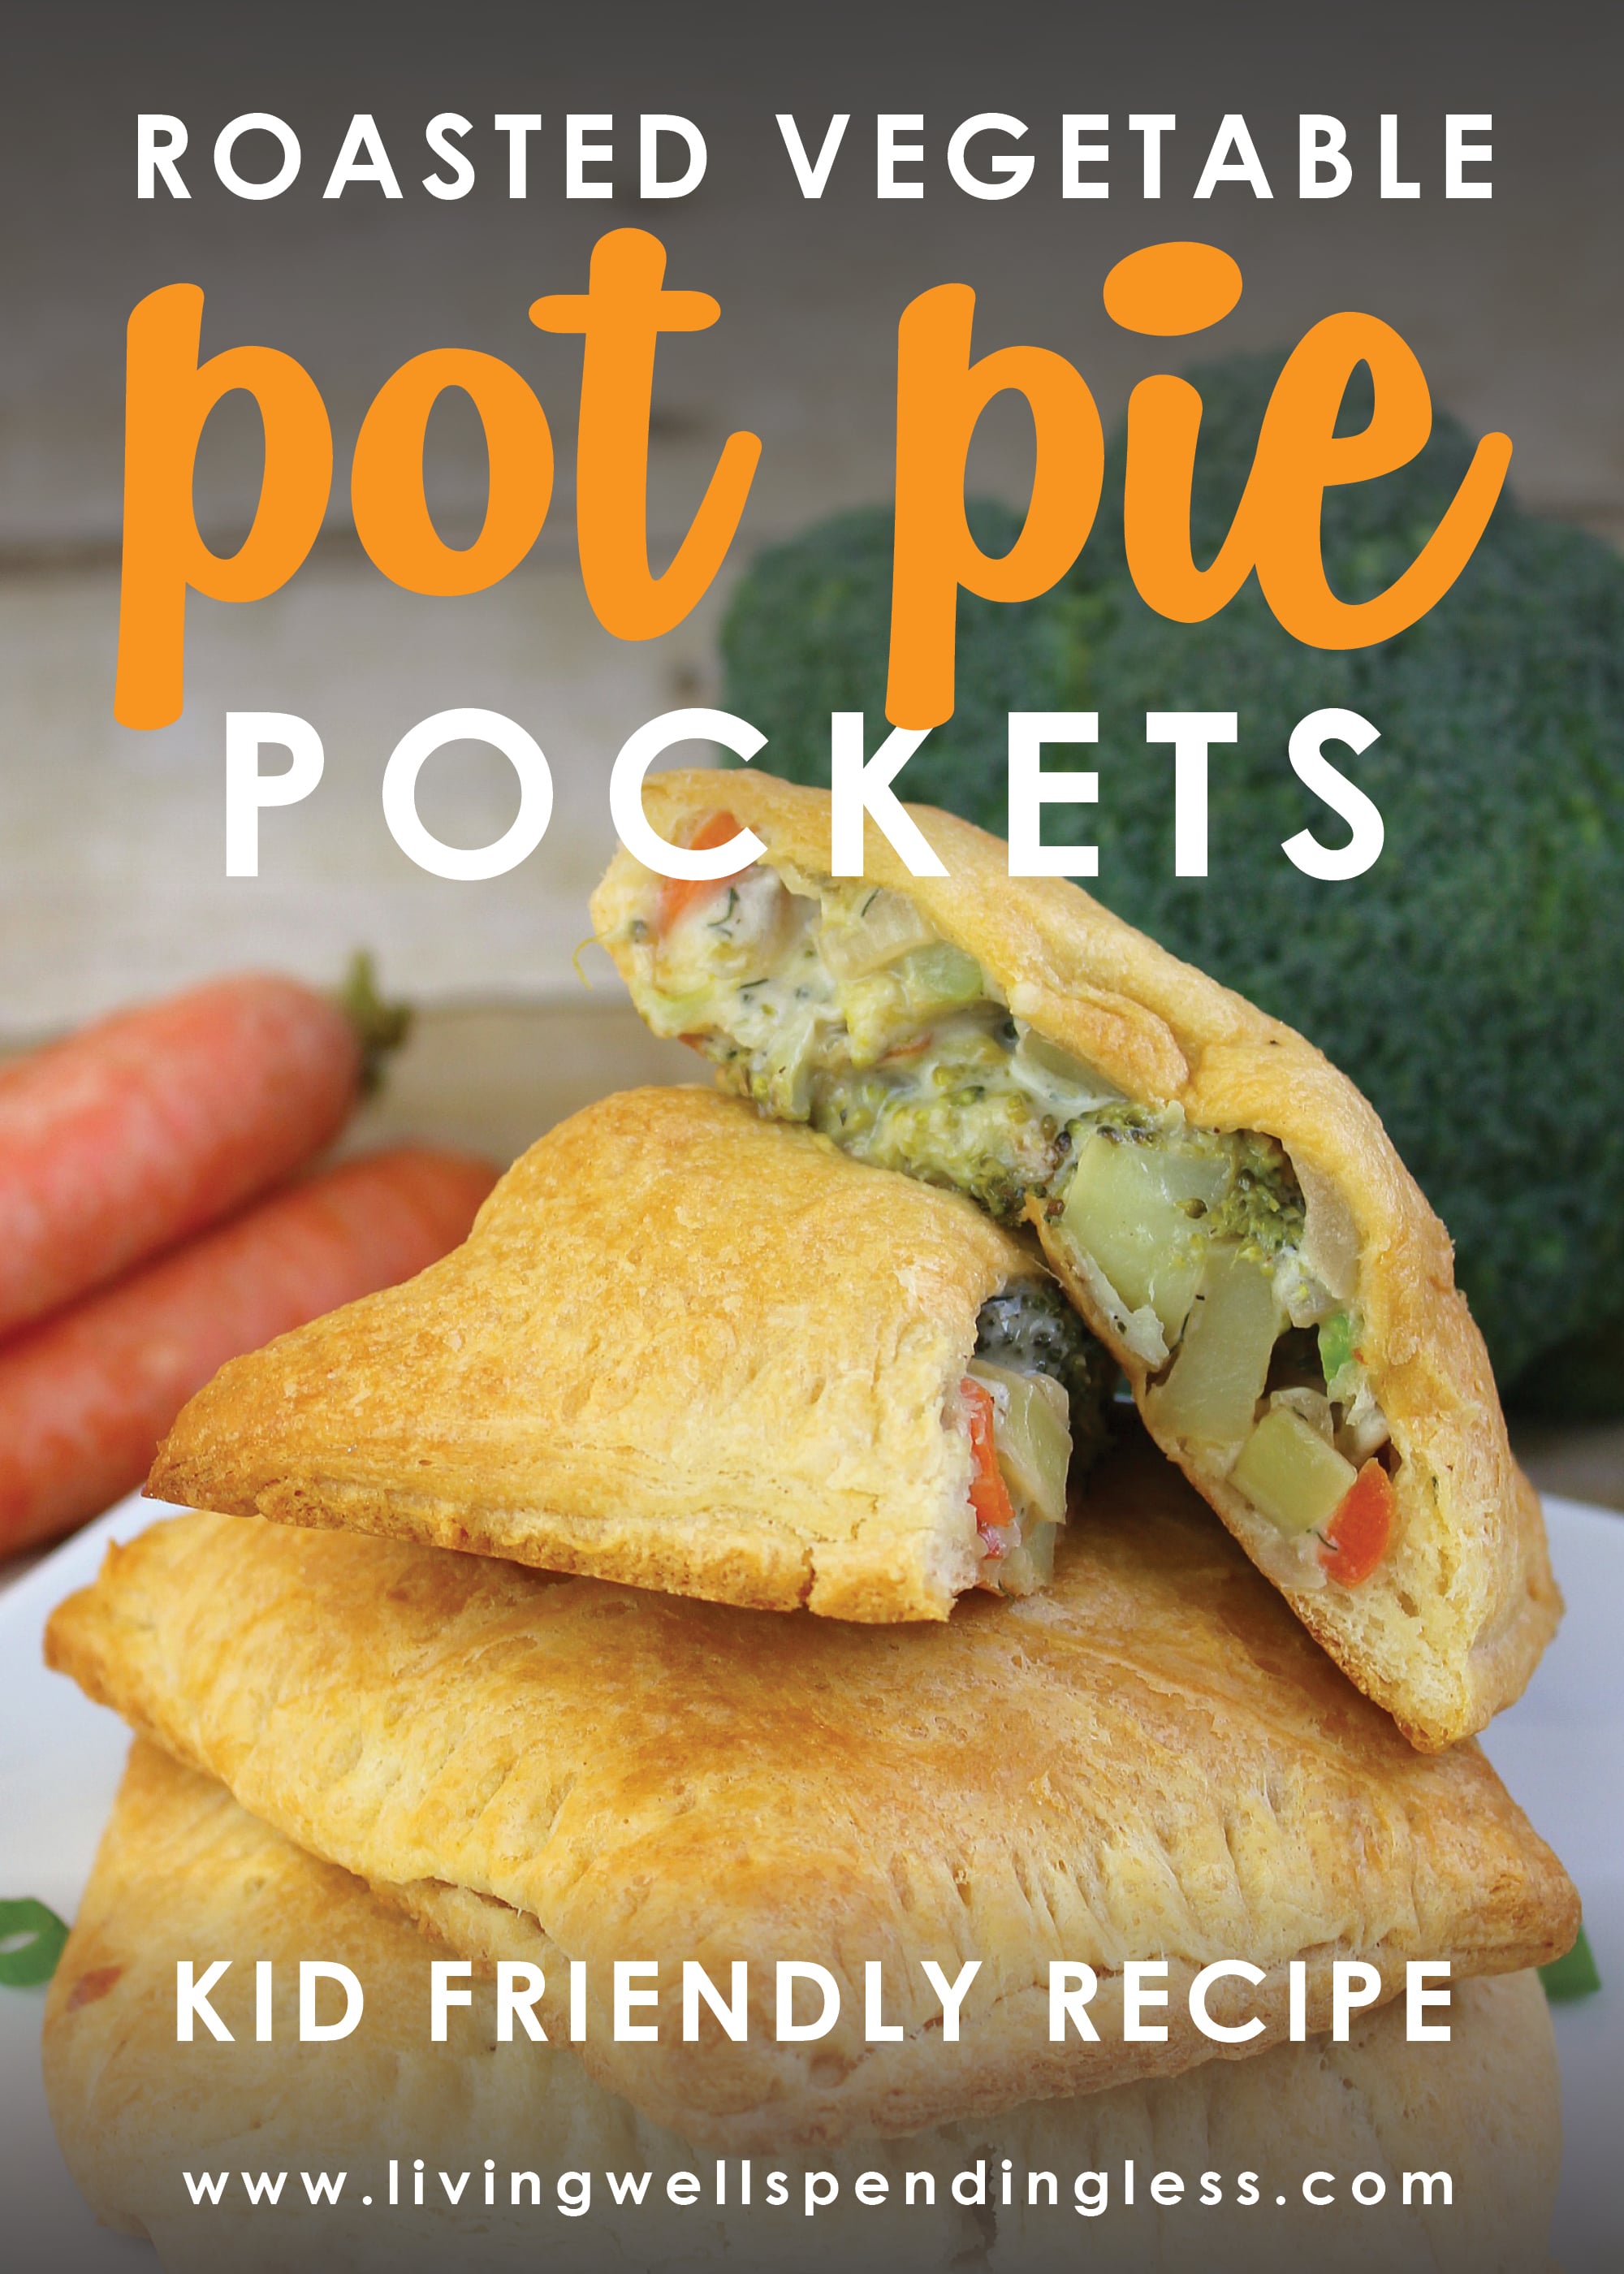 Craving comfort food? These yummy "cheater" Roasted Vegetable Pot Pie pockets are easy, delicious, and kid-friendly too!